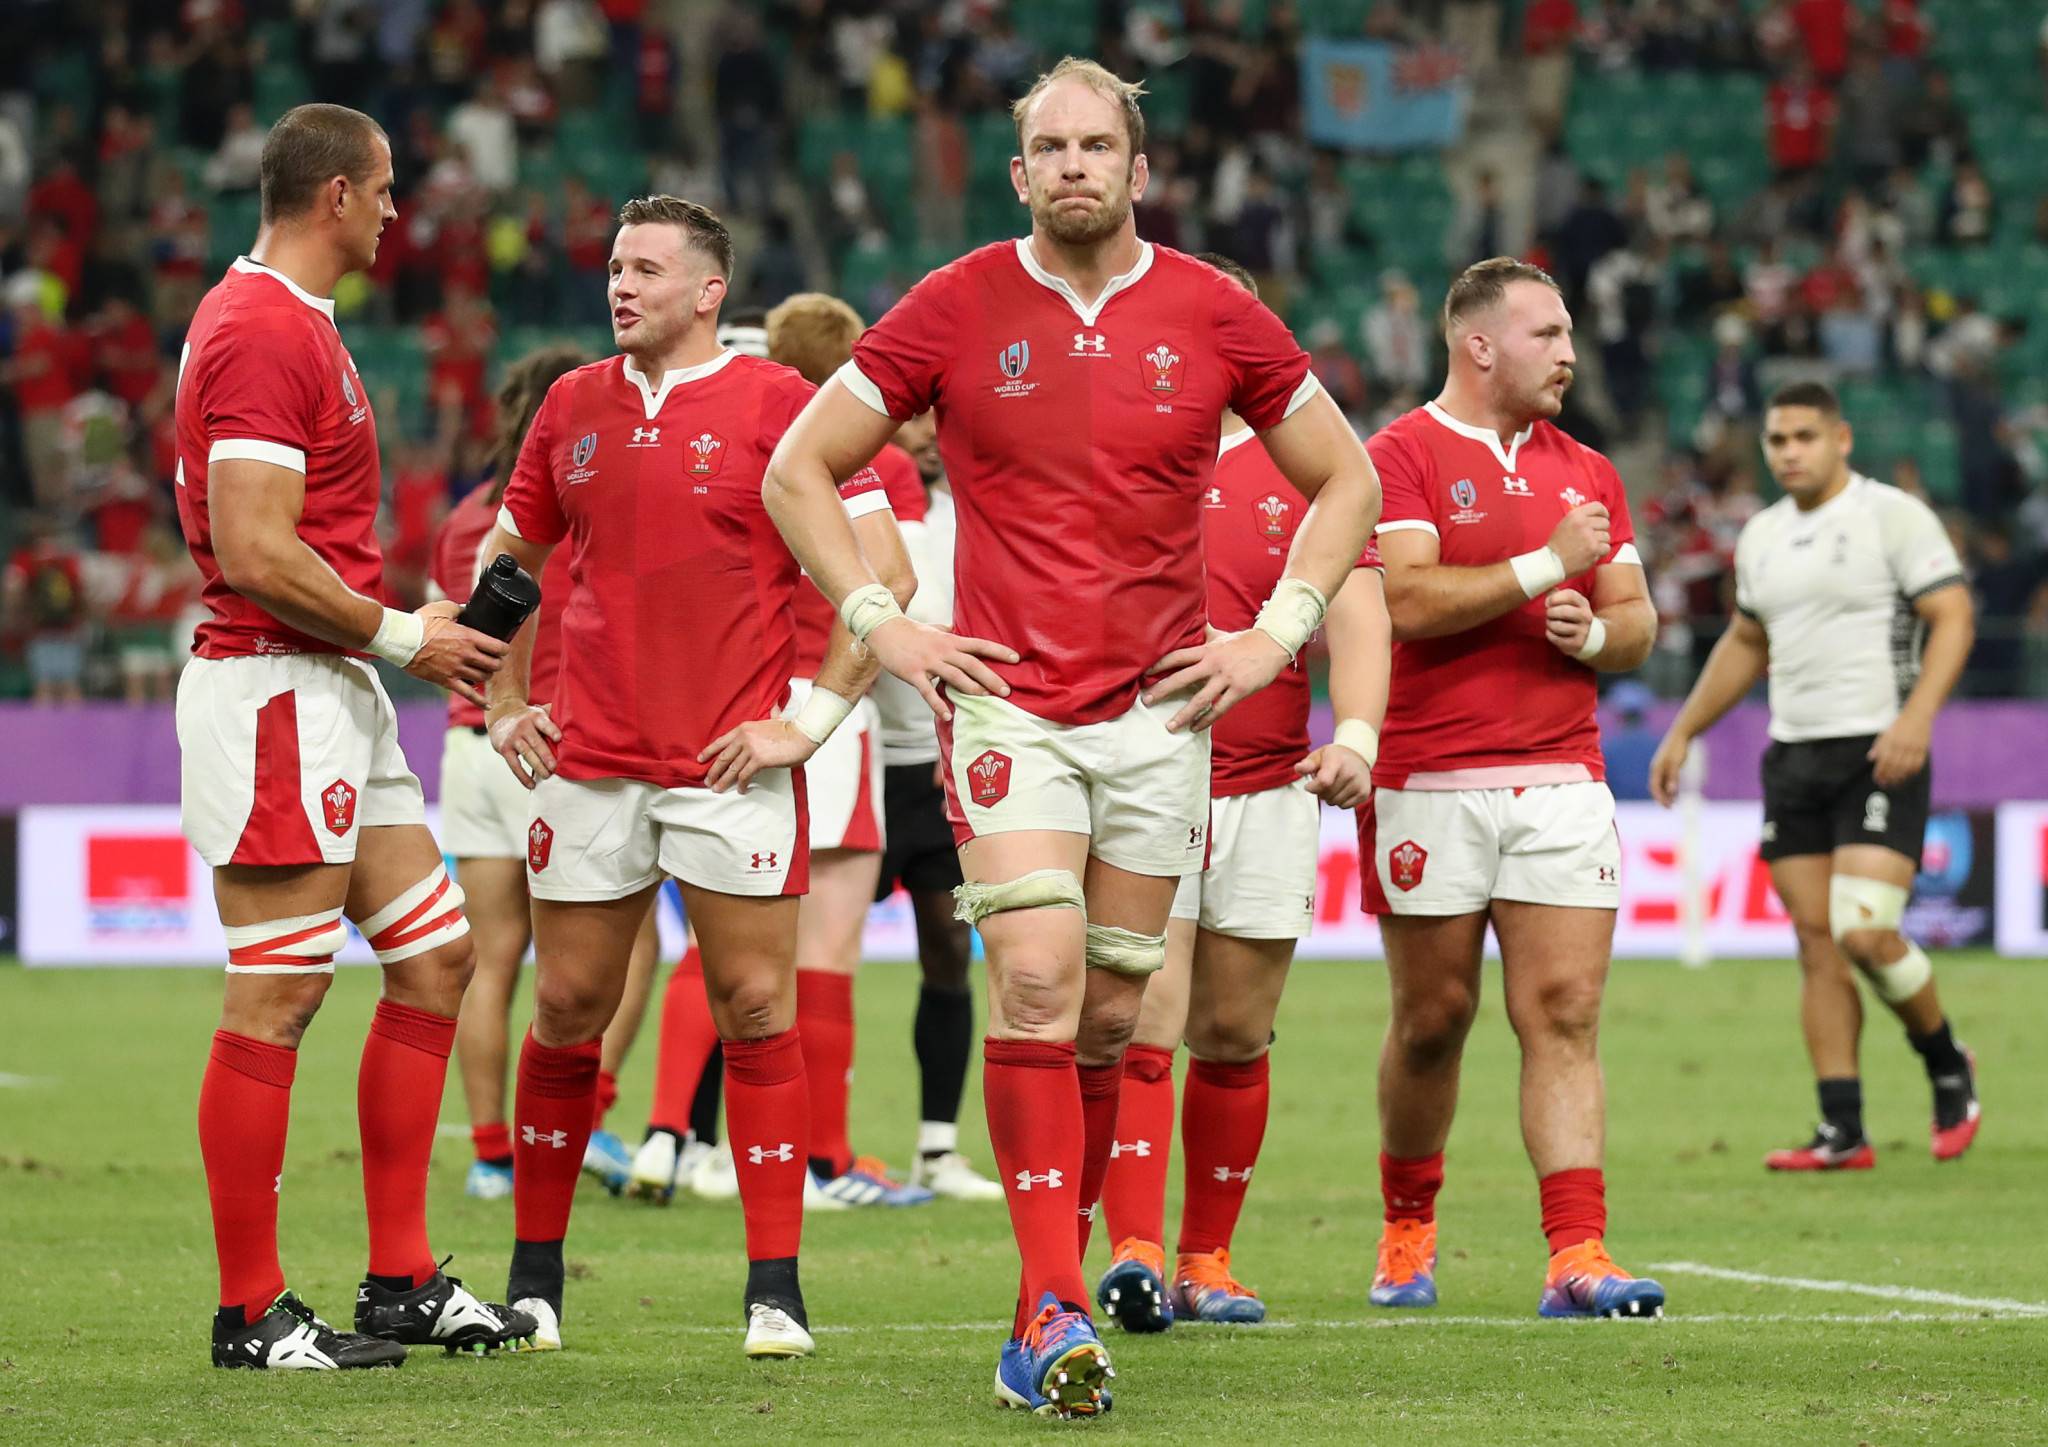 Battered and bruised, Wales have much to work on ©Getty Images